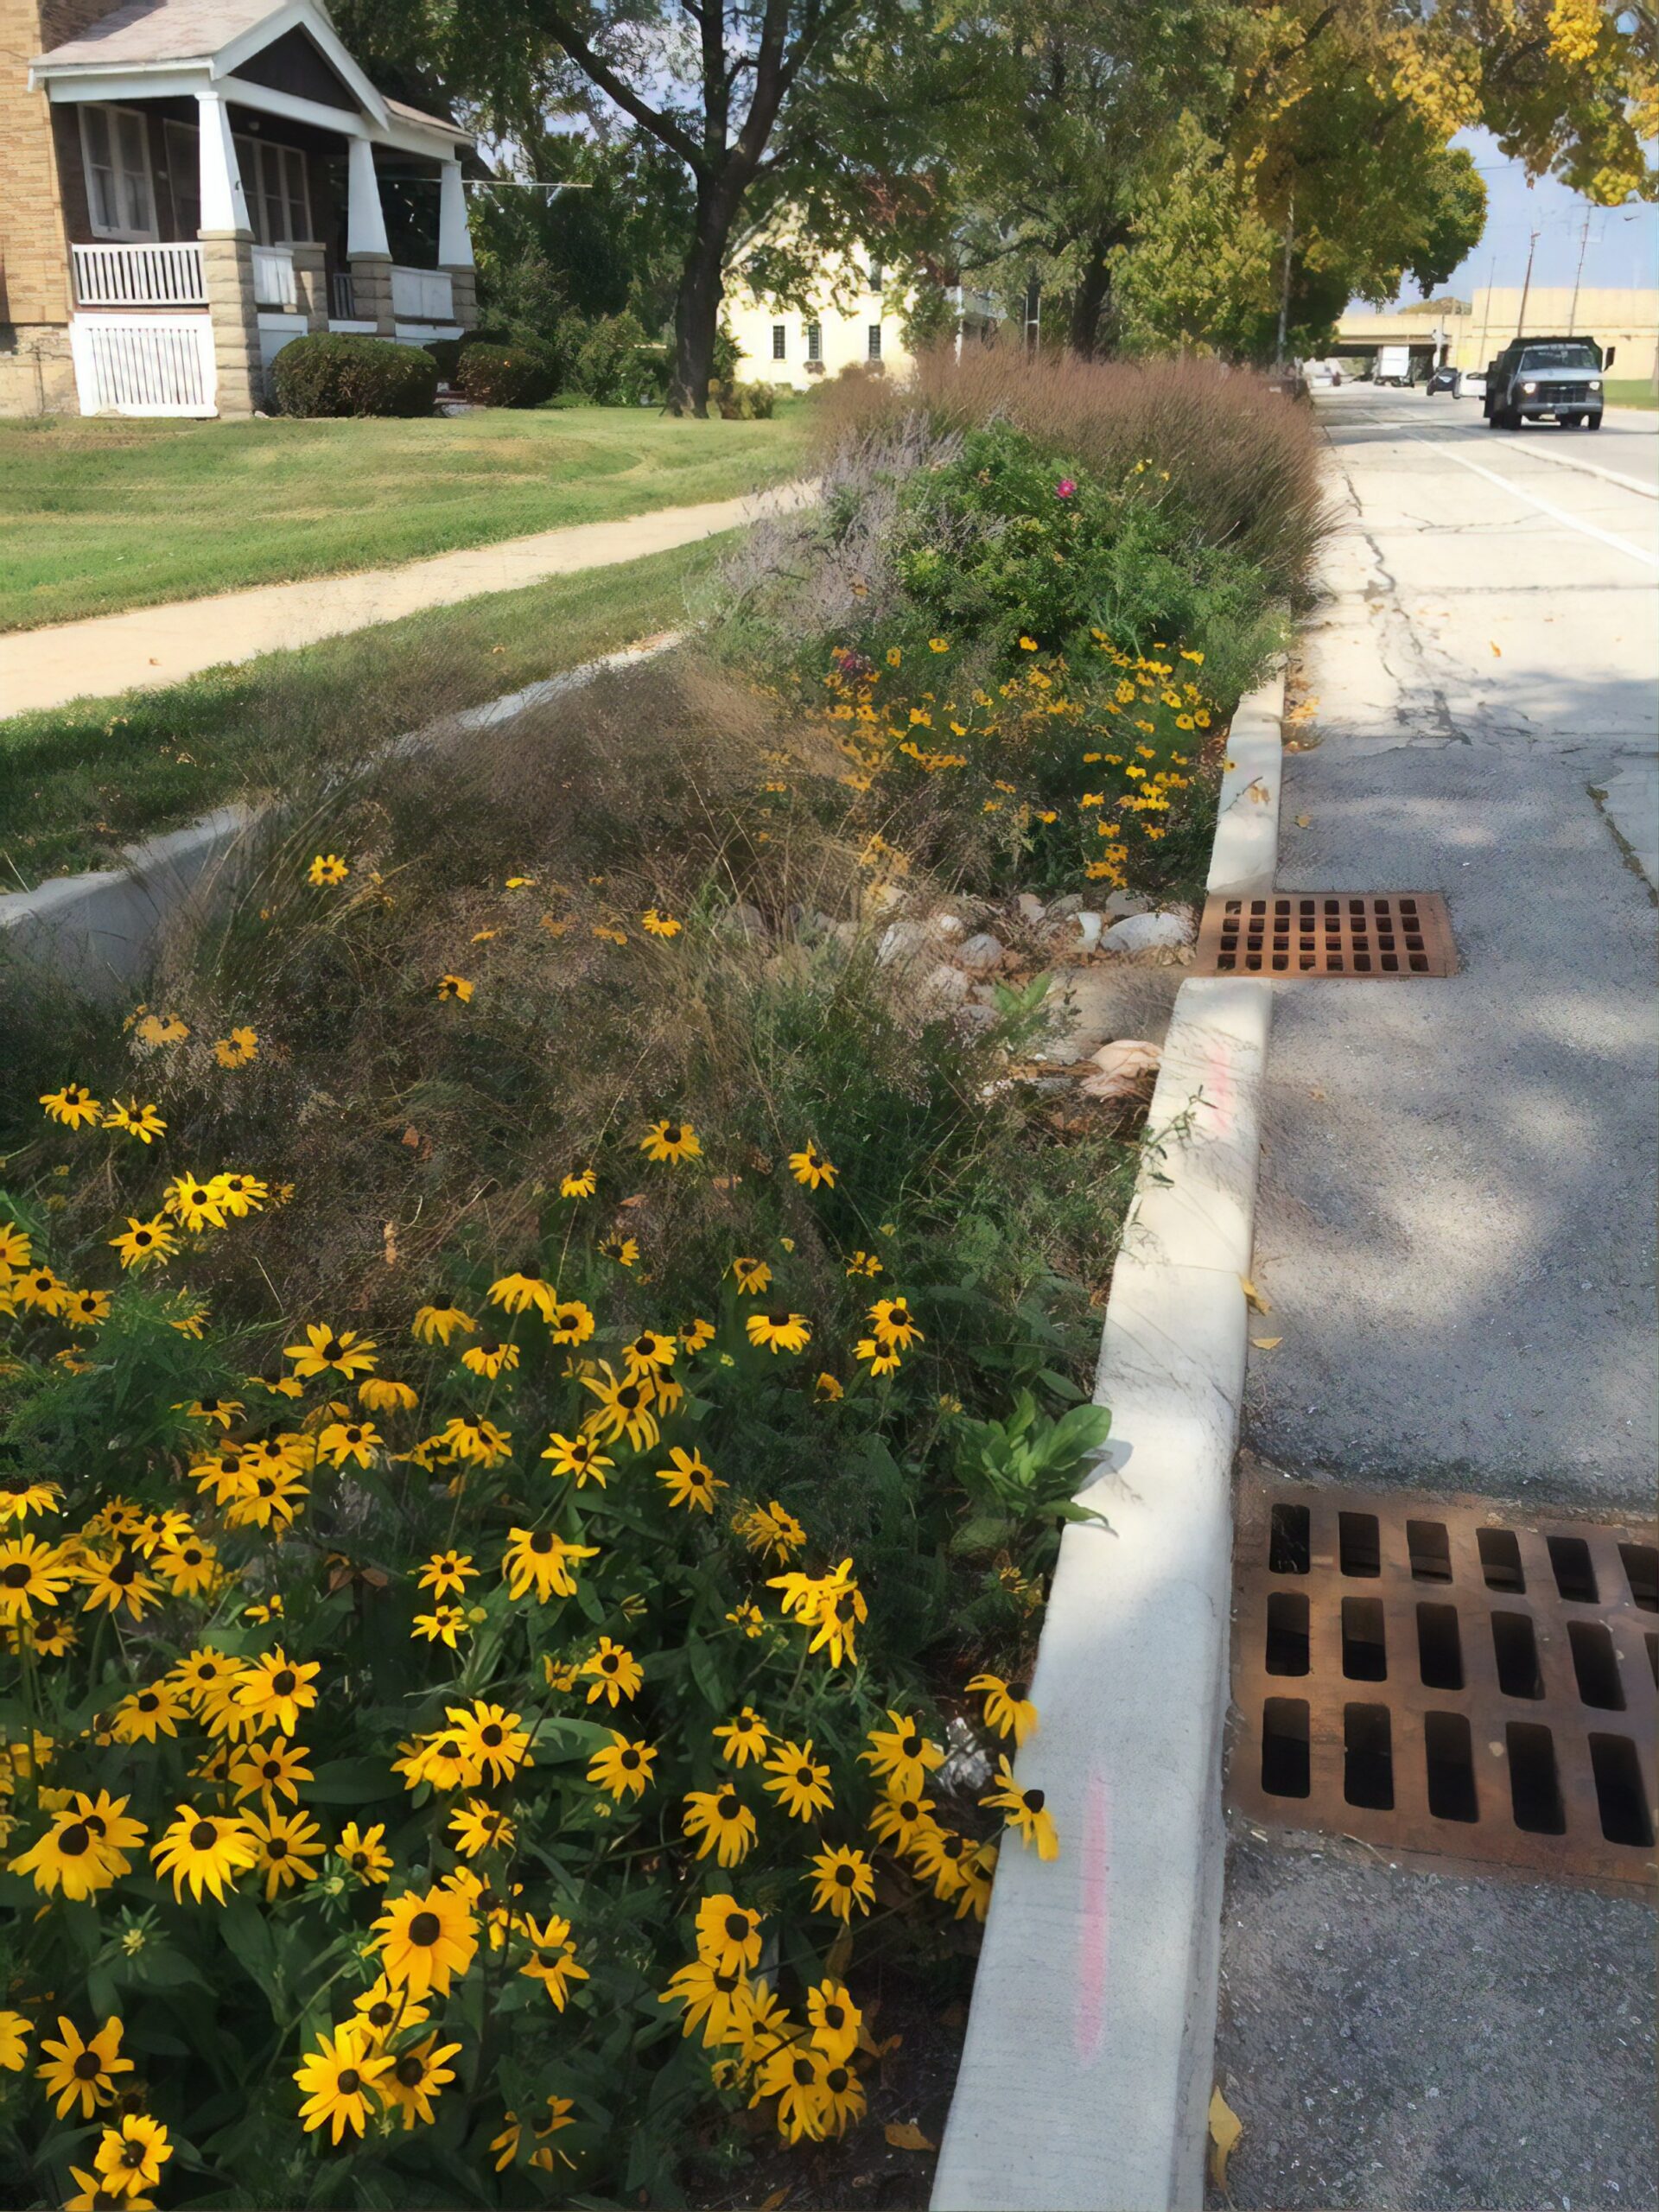 Green infrastructure used to capture stormwater